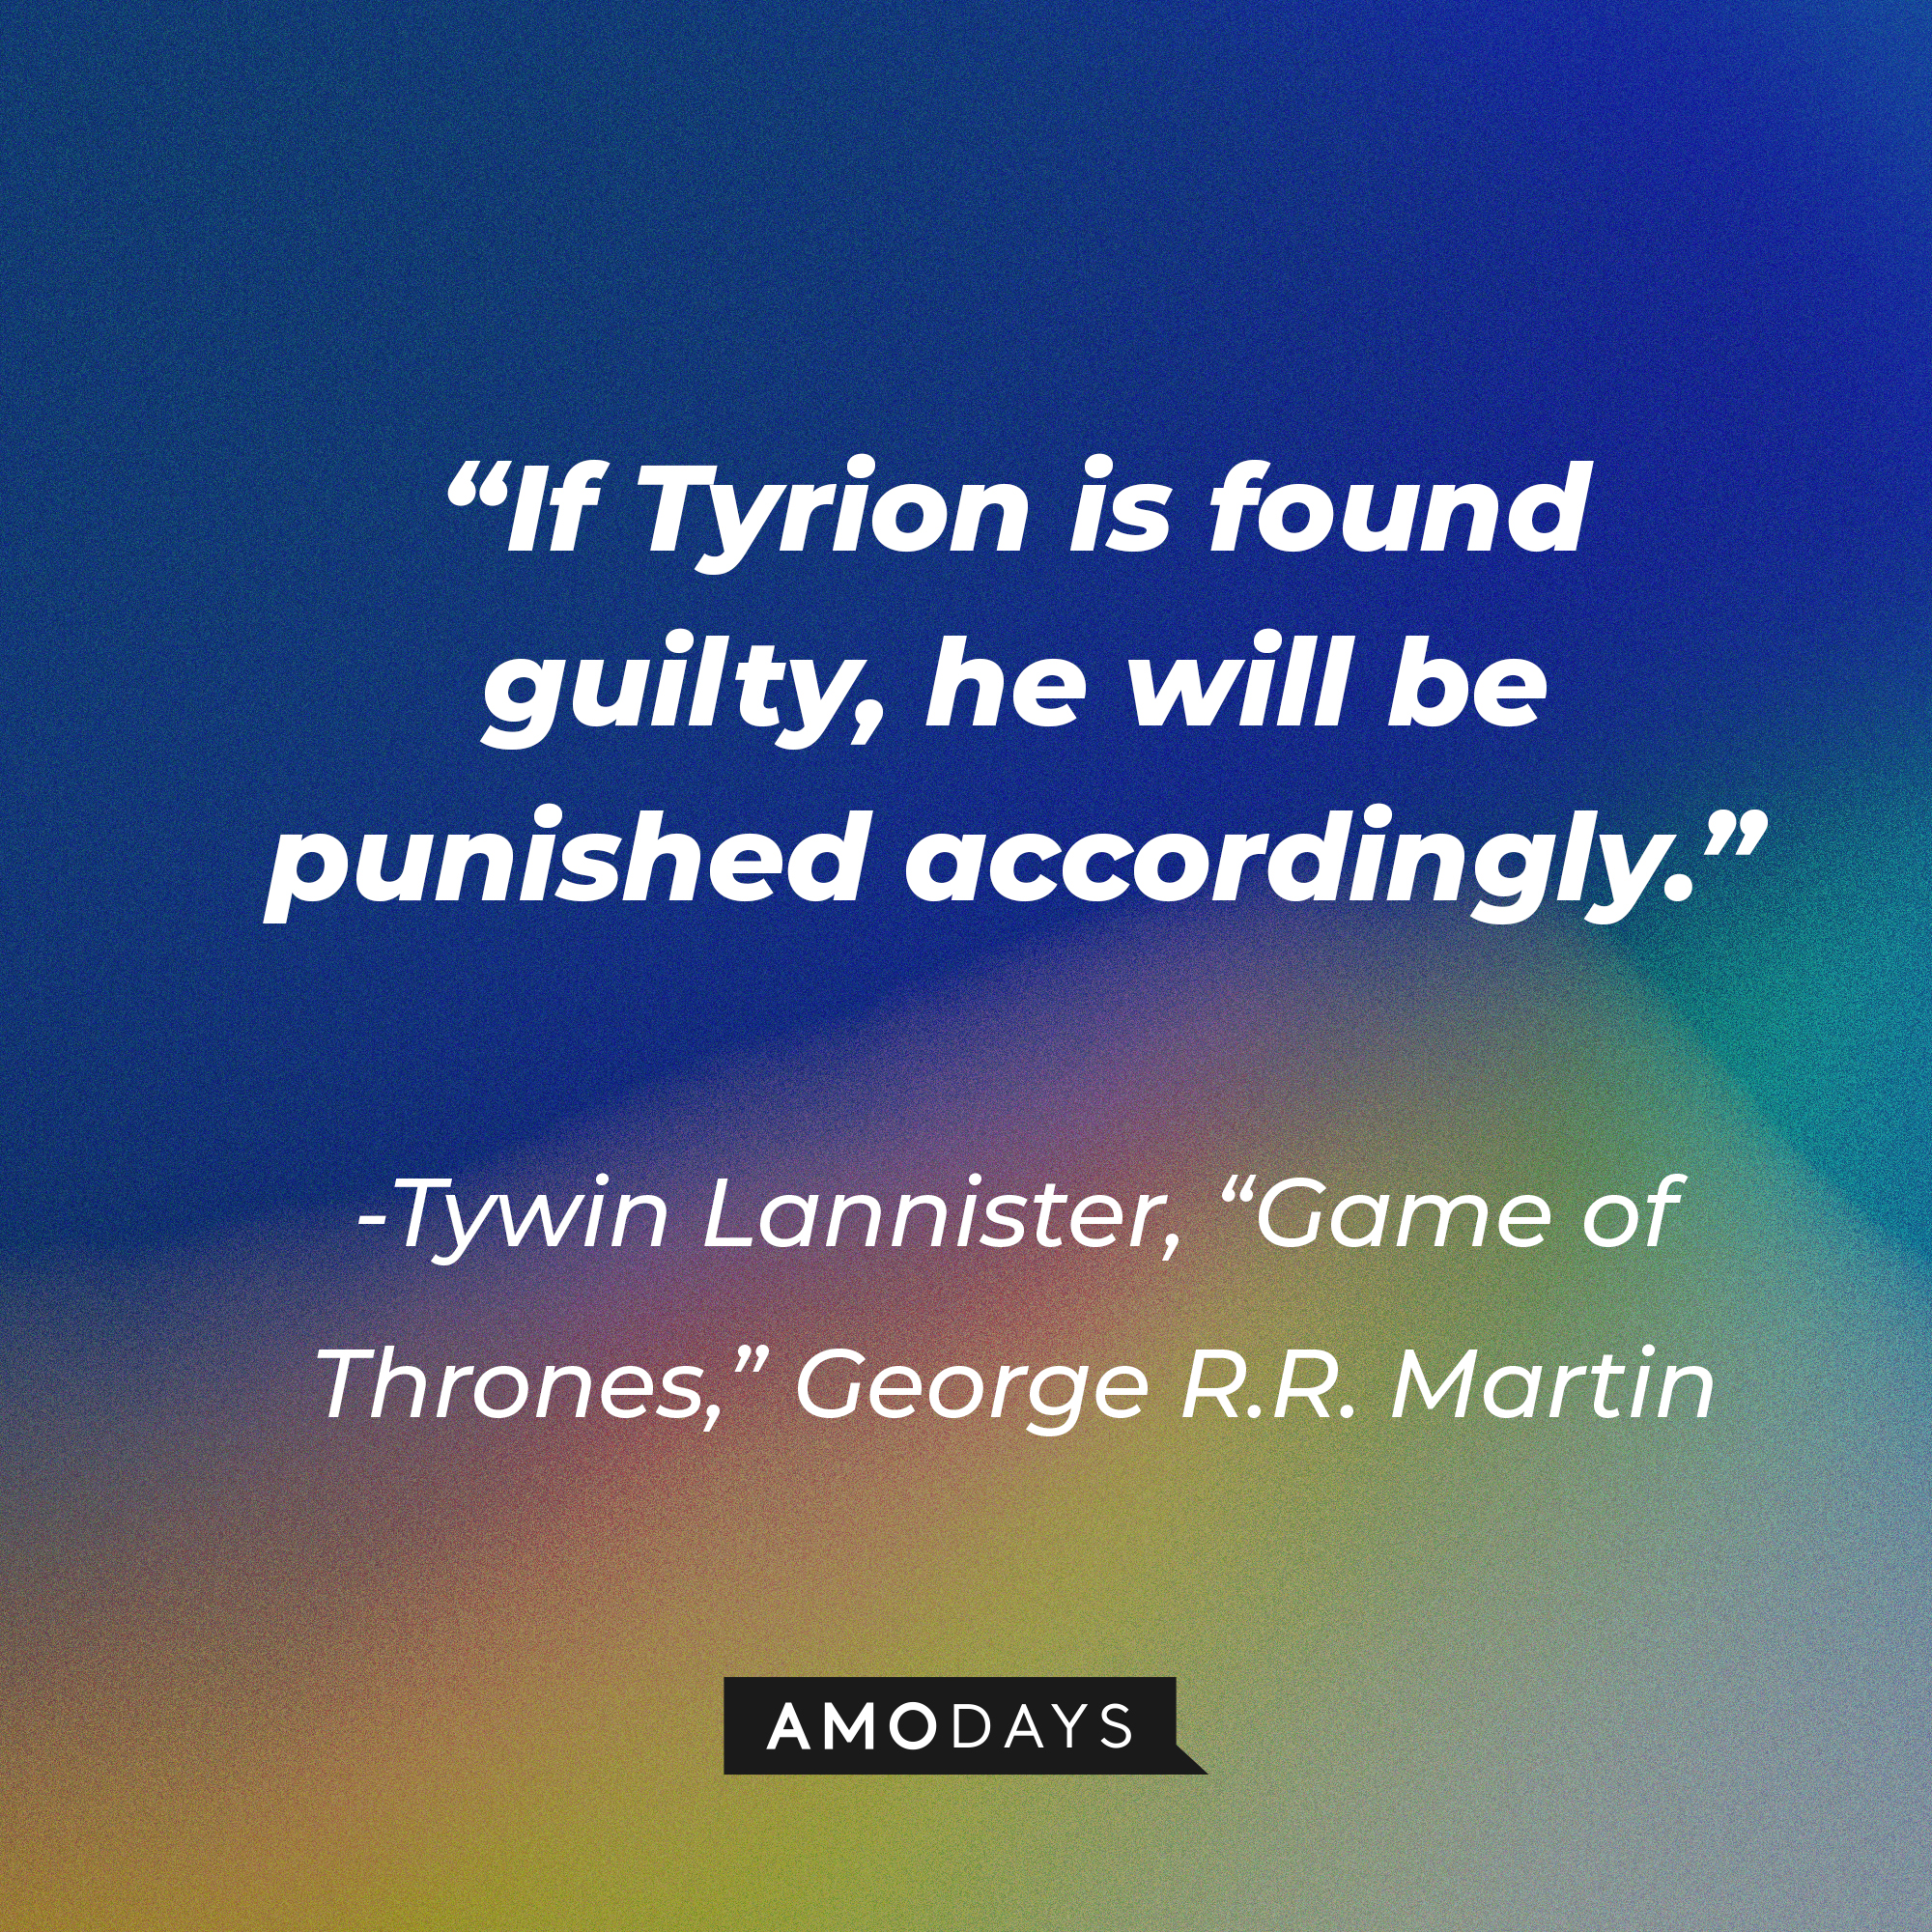 Tywin Lannister’s quote from George R.R. Martin's "Game of Thrones": “If Tyrion is found guilty, he will be punished accordingly.” | Source: AmoDays